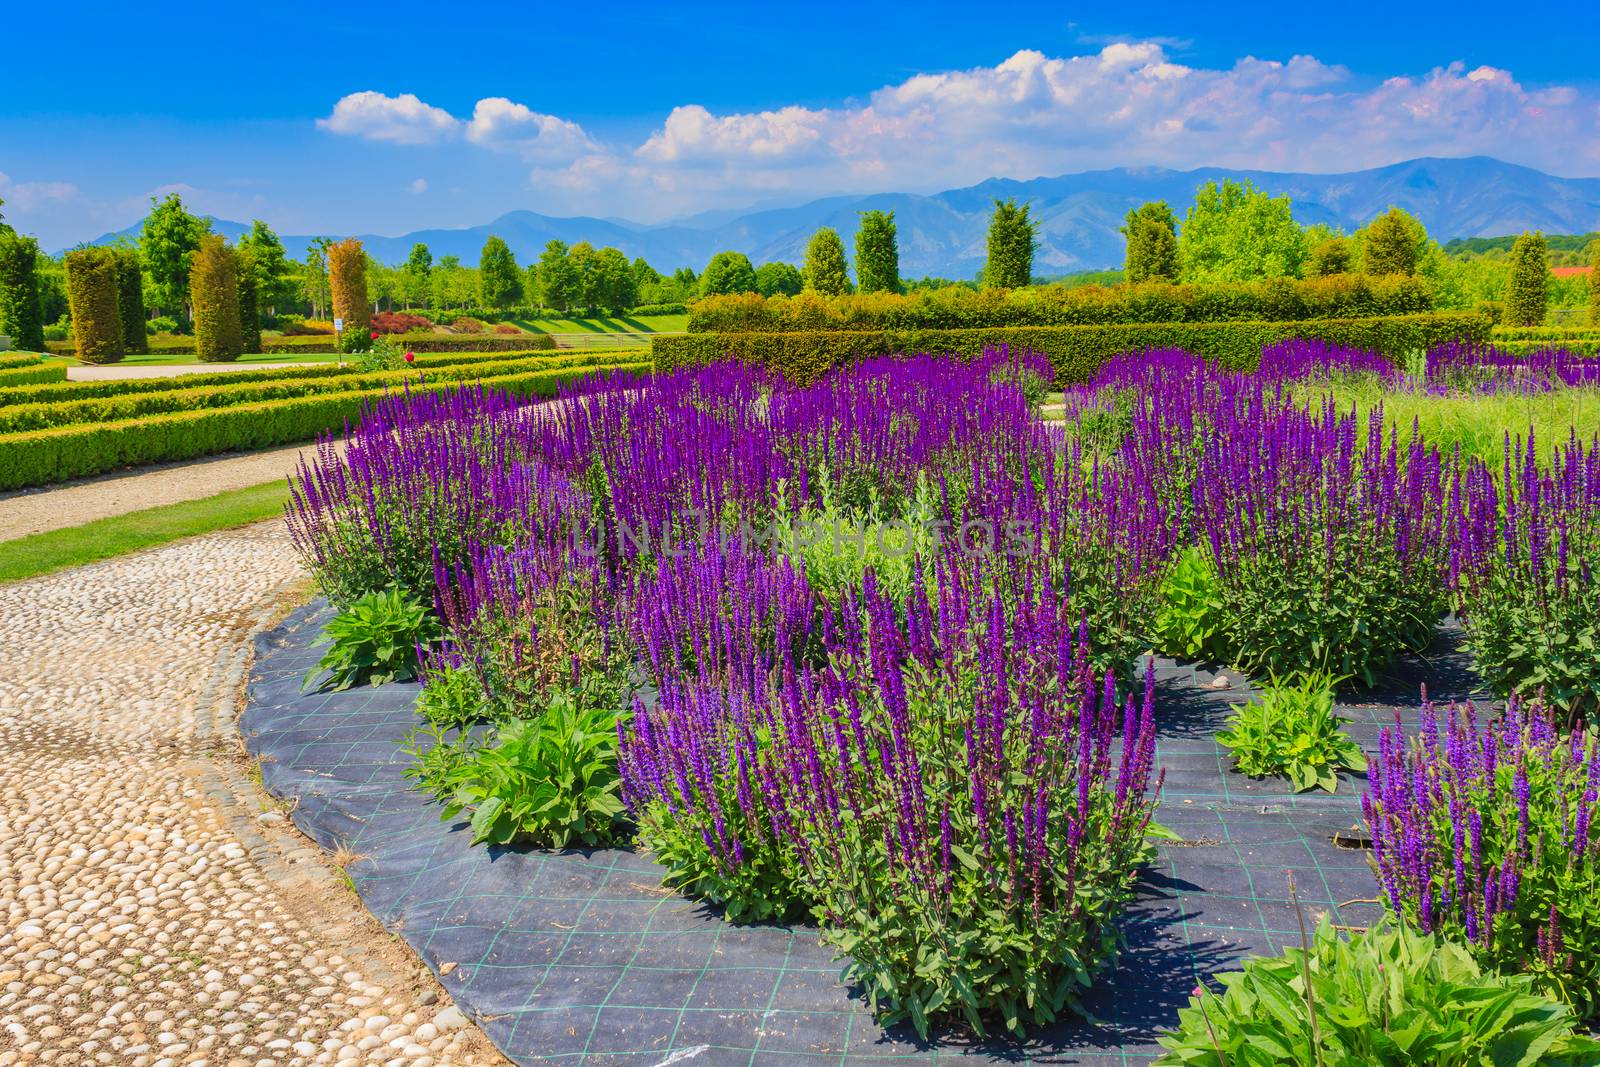 an expanse of purple sage flowers in the vegetable -garden  of Venaria's royal  palace near Turin,in Piedmont (ITALY)